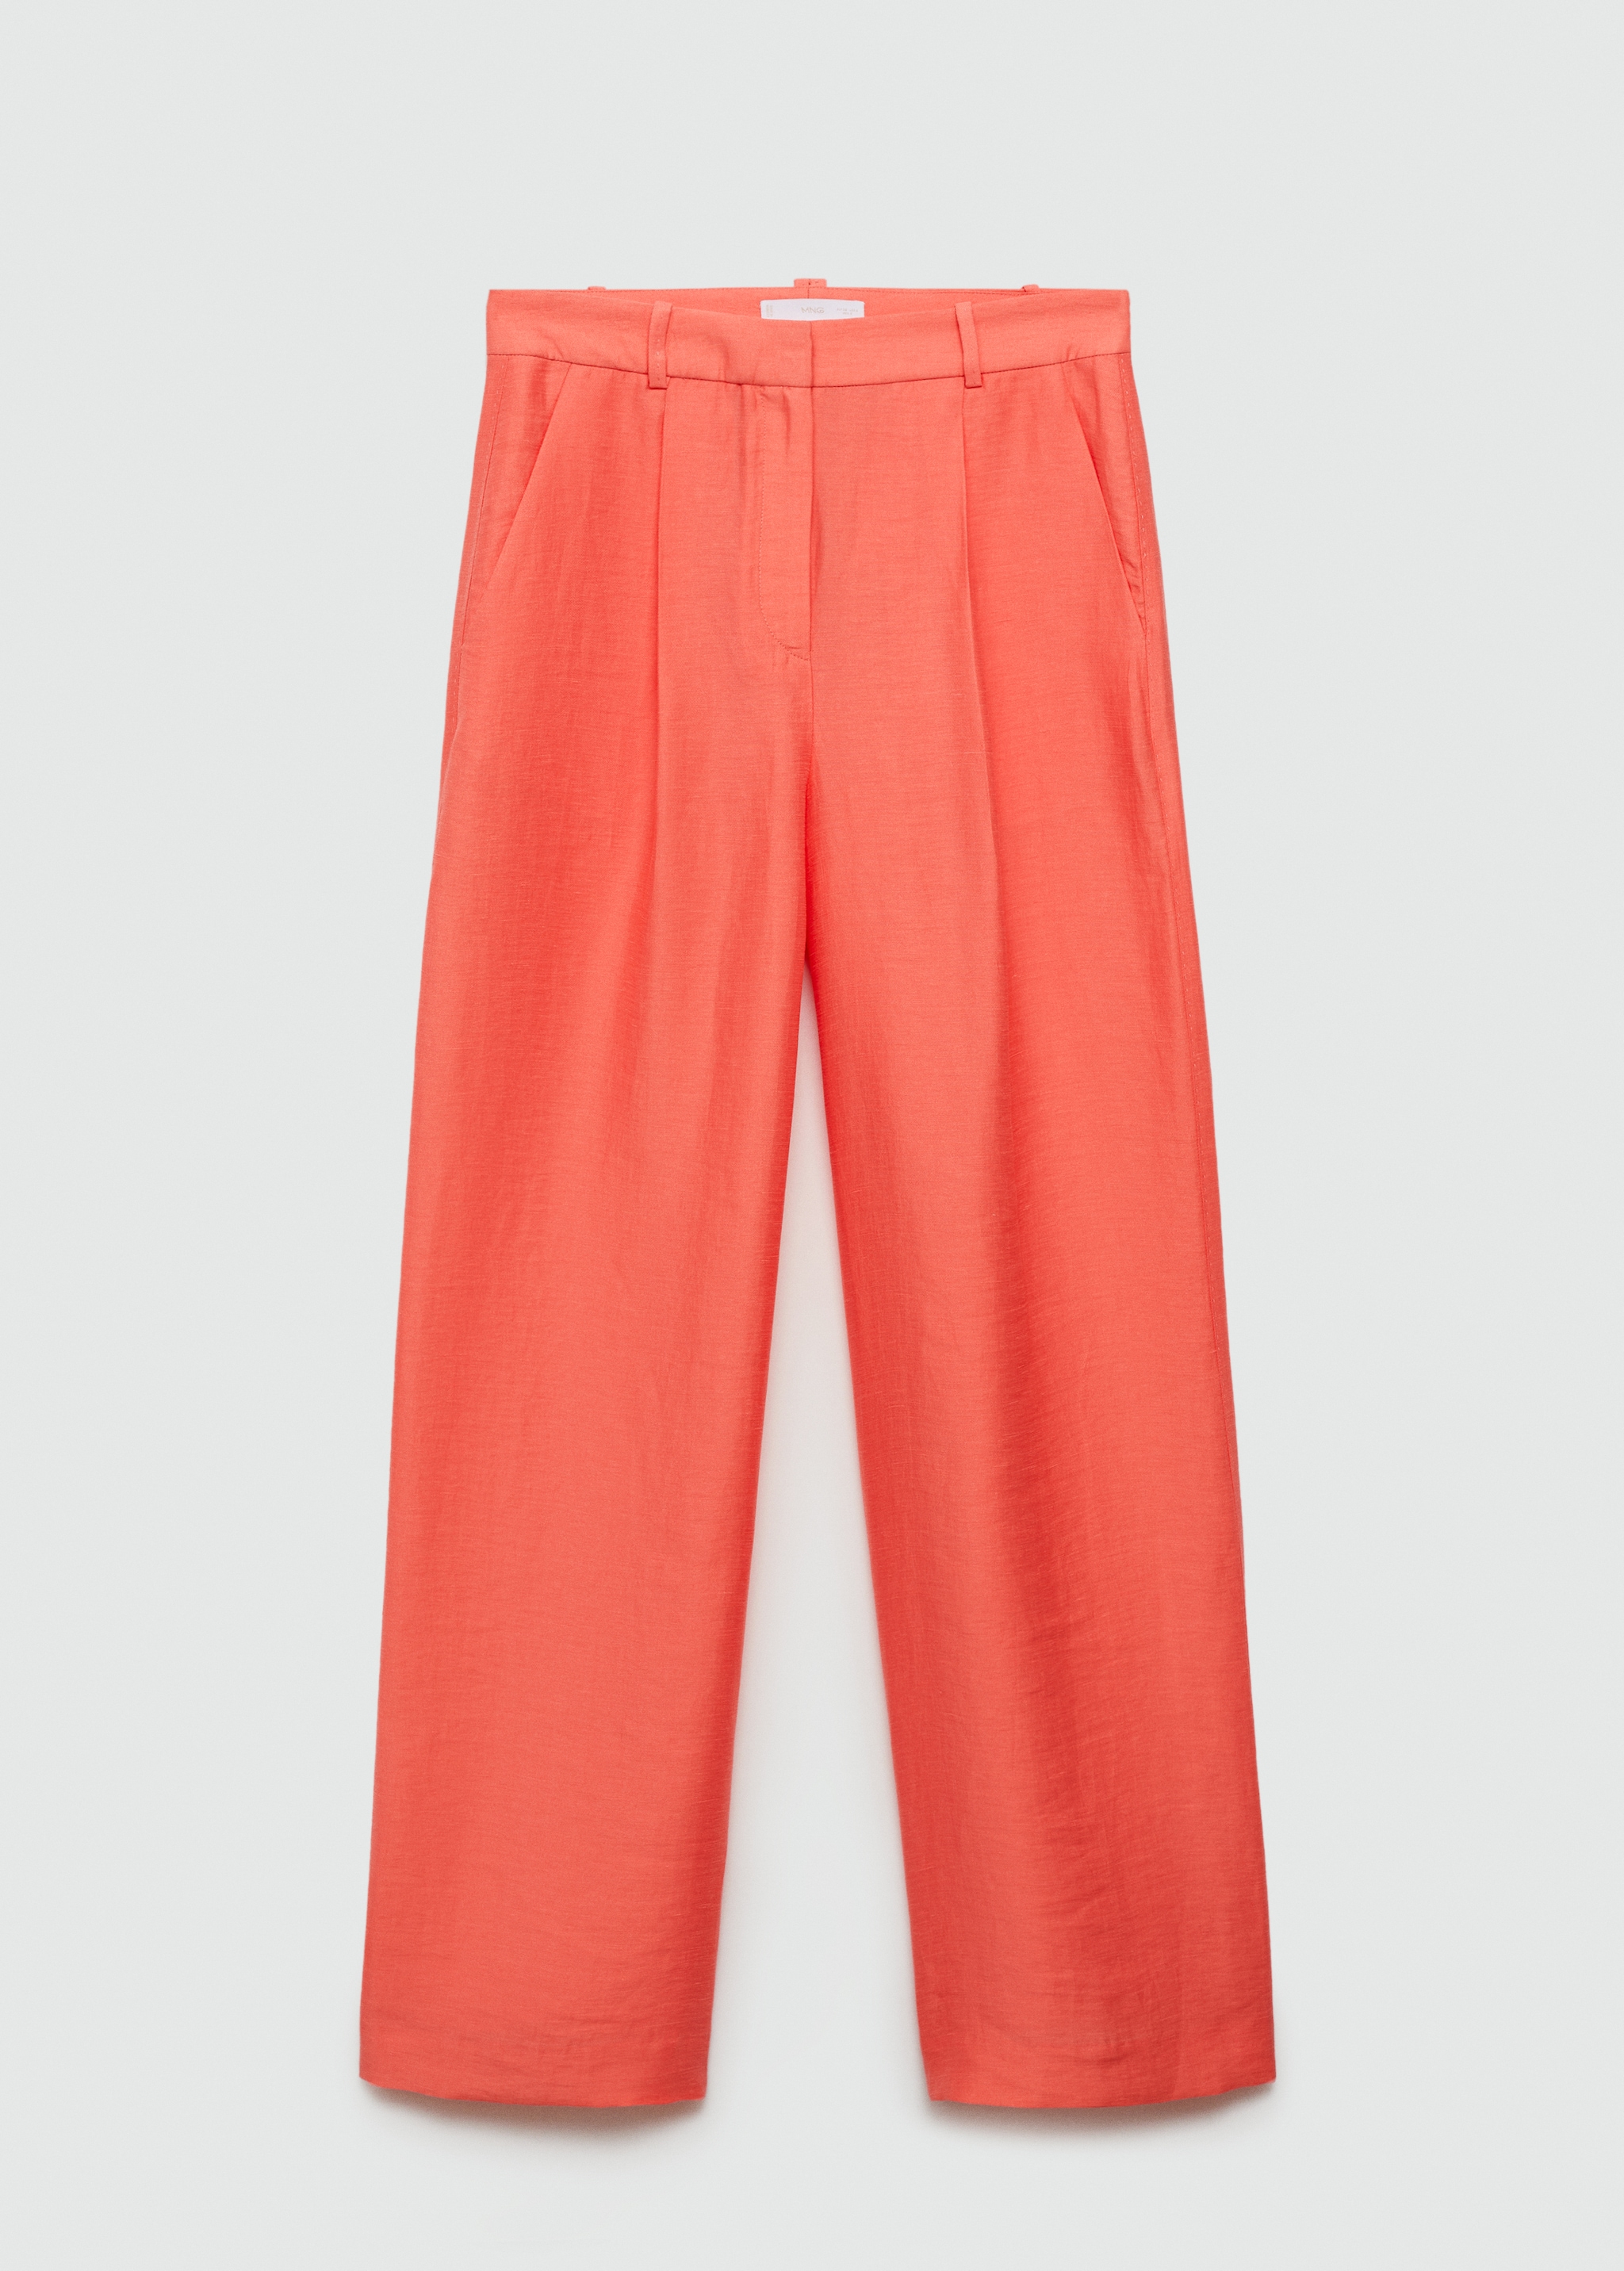 Wideleg linen pants - Article without model